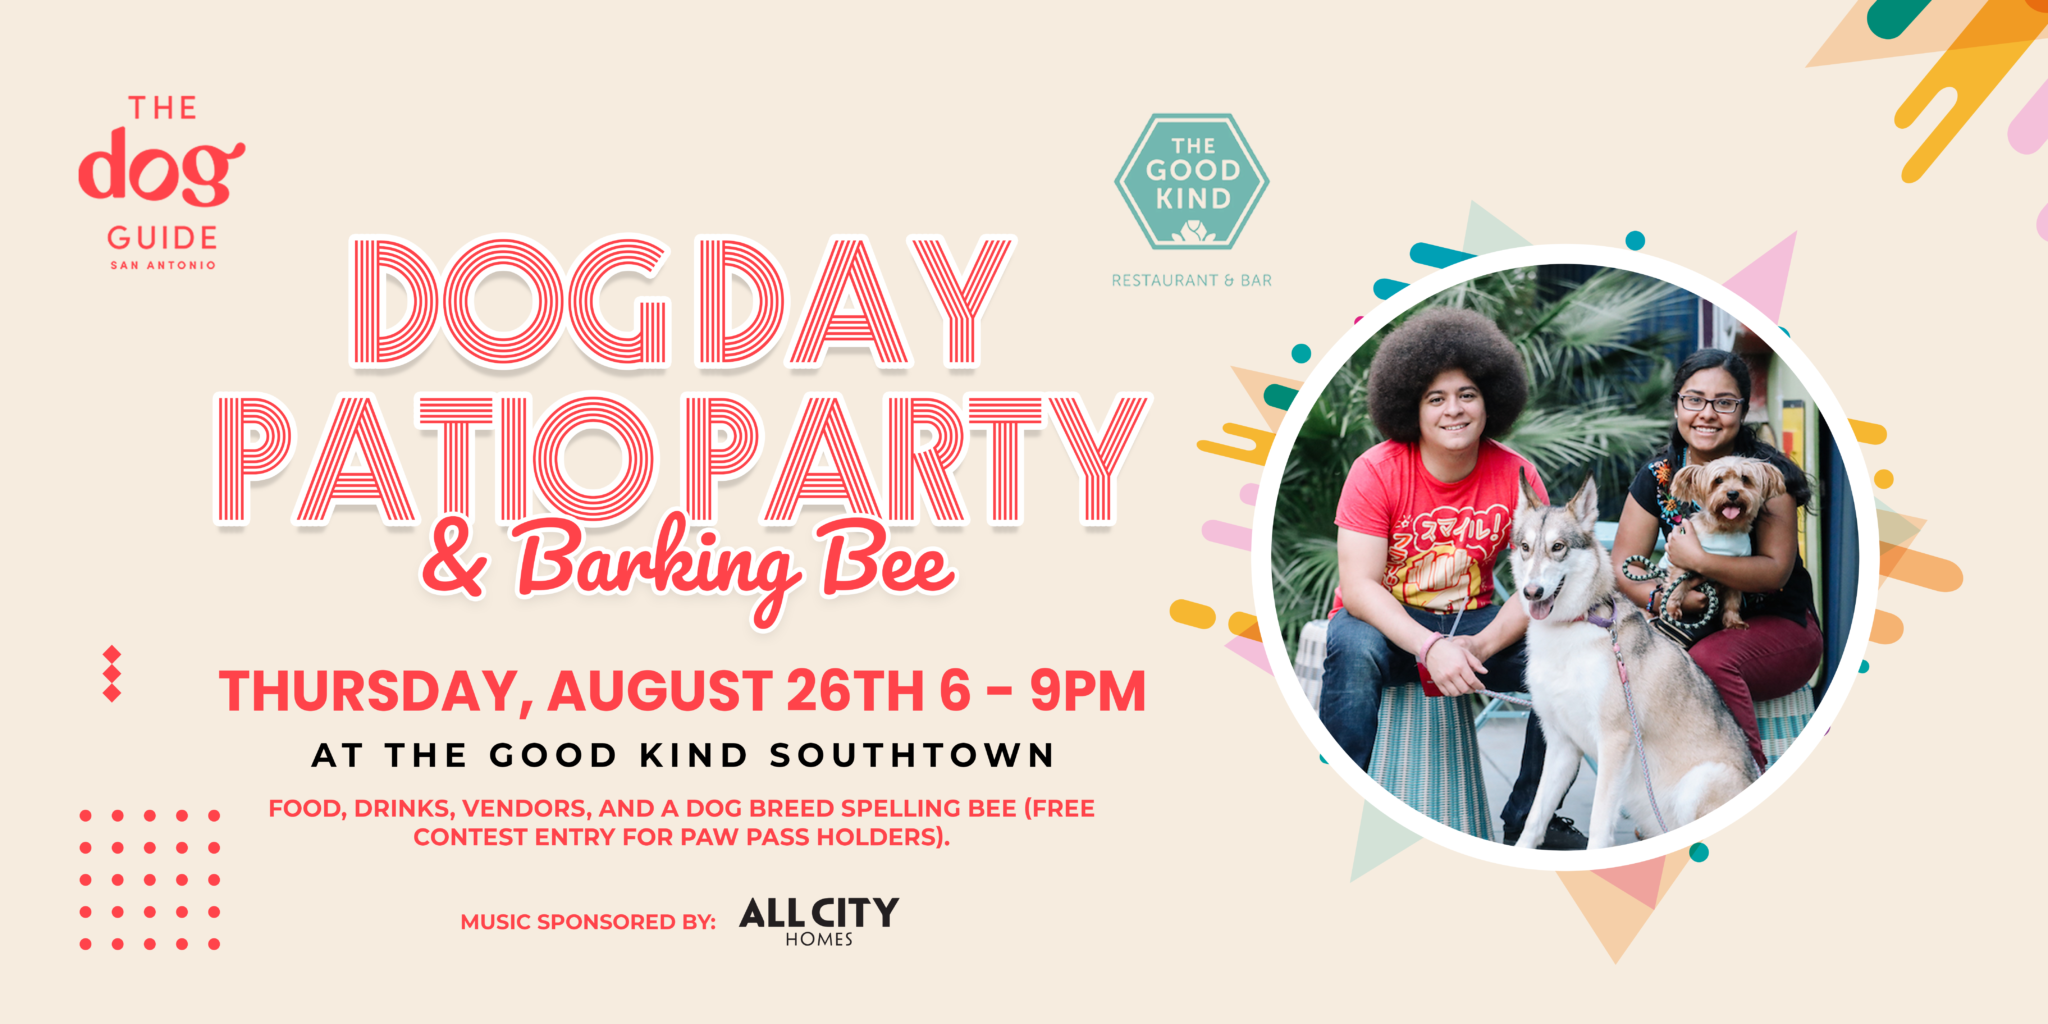 Dog Day Patio Party & Barking Bee